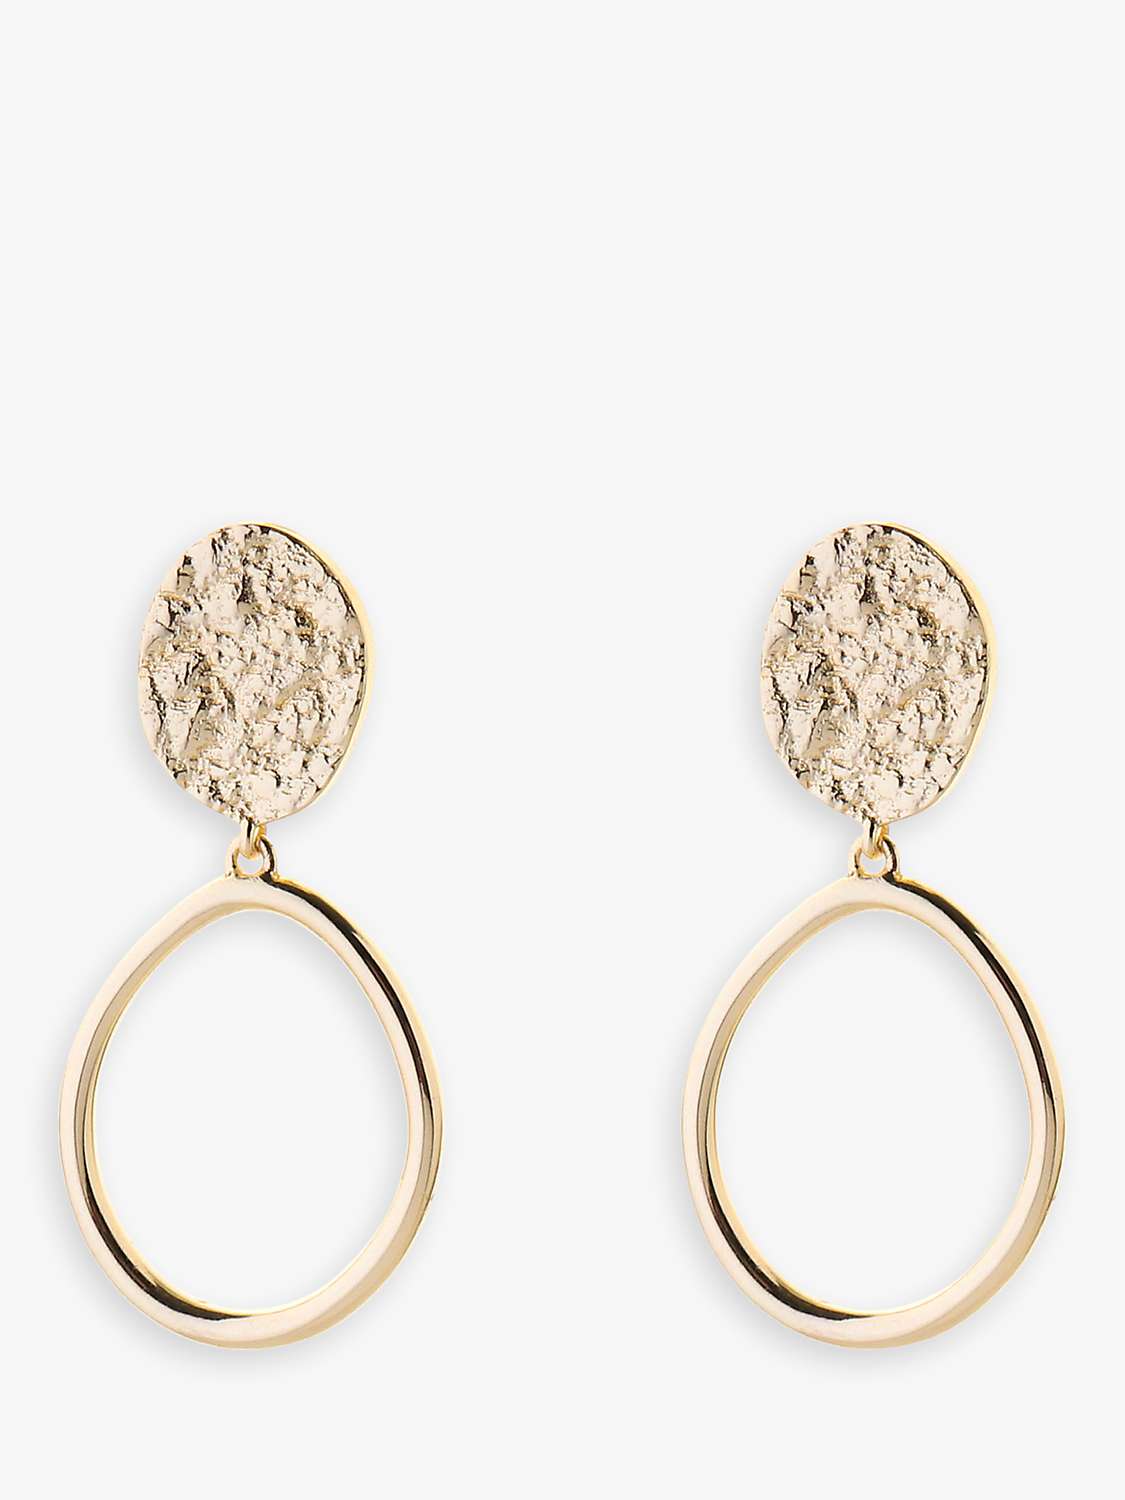 Buy Tutti & Co Textured Oval Drop Earrings, Gold Online at johnlewis.com